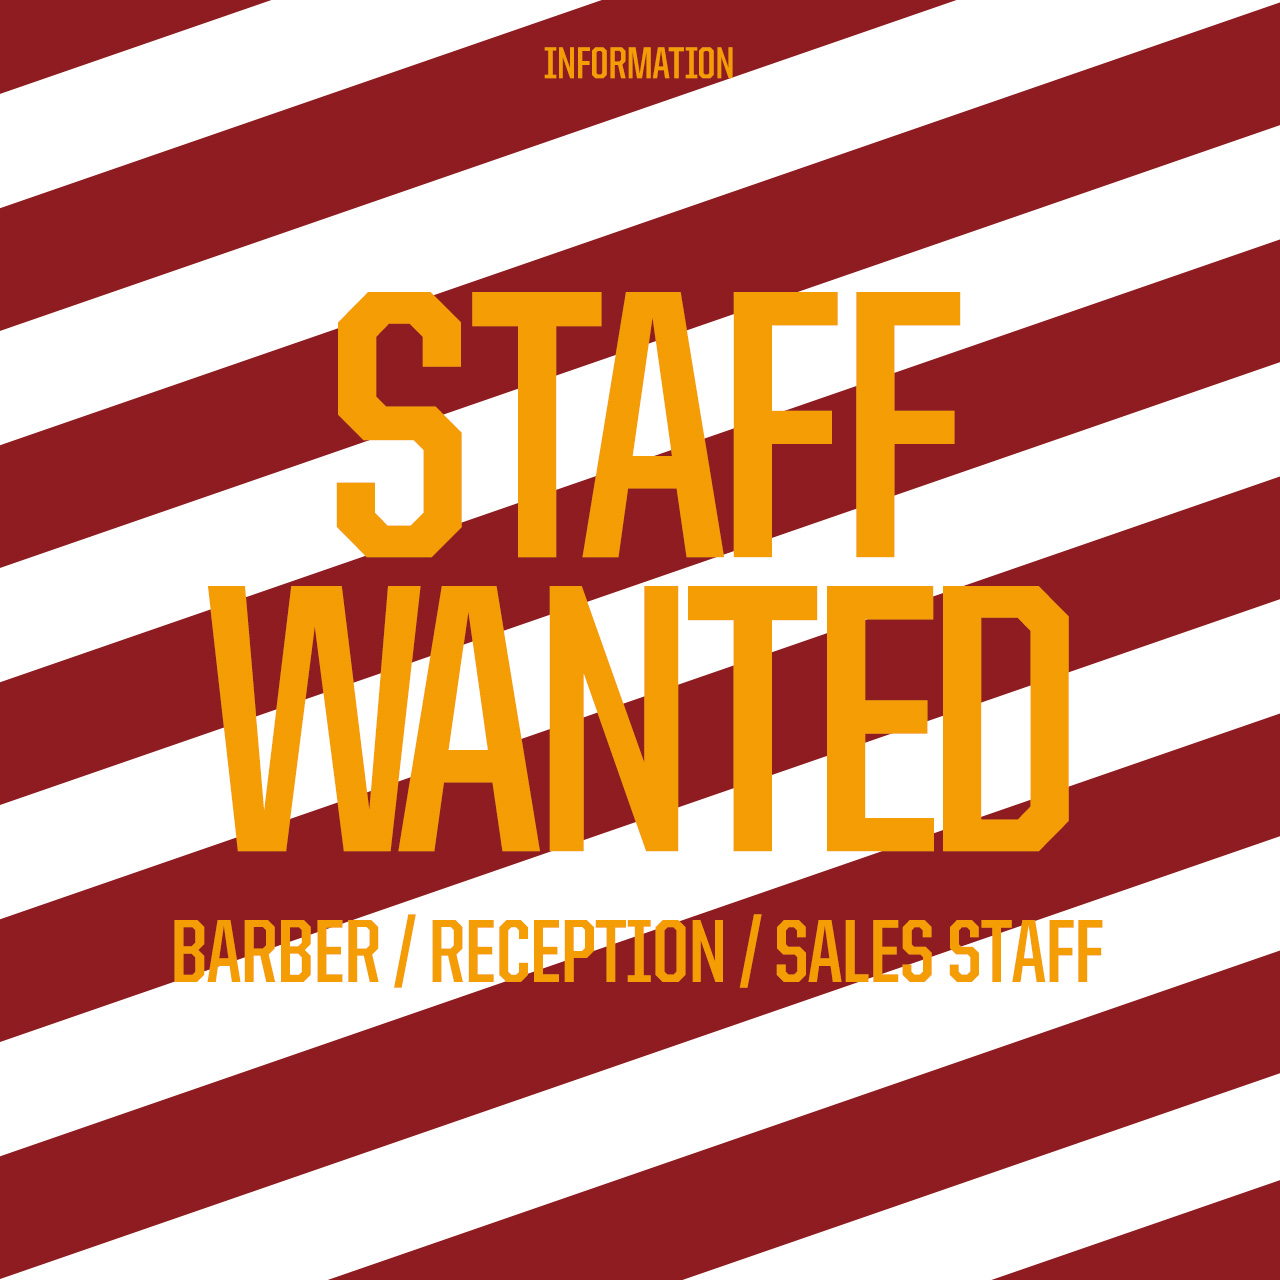 BARBER STAFF WANTED